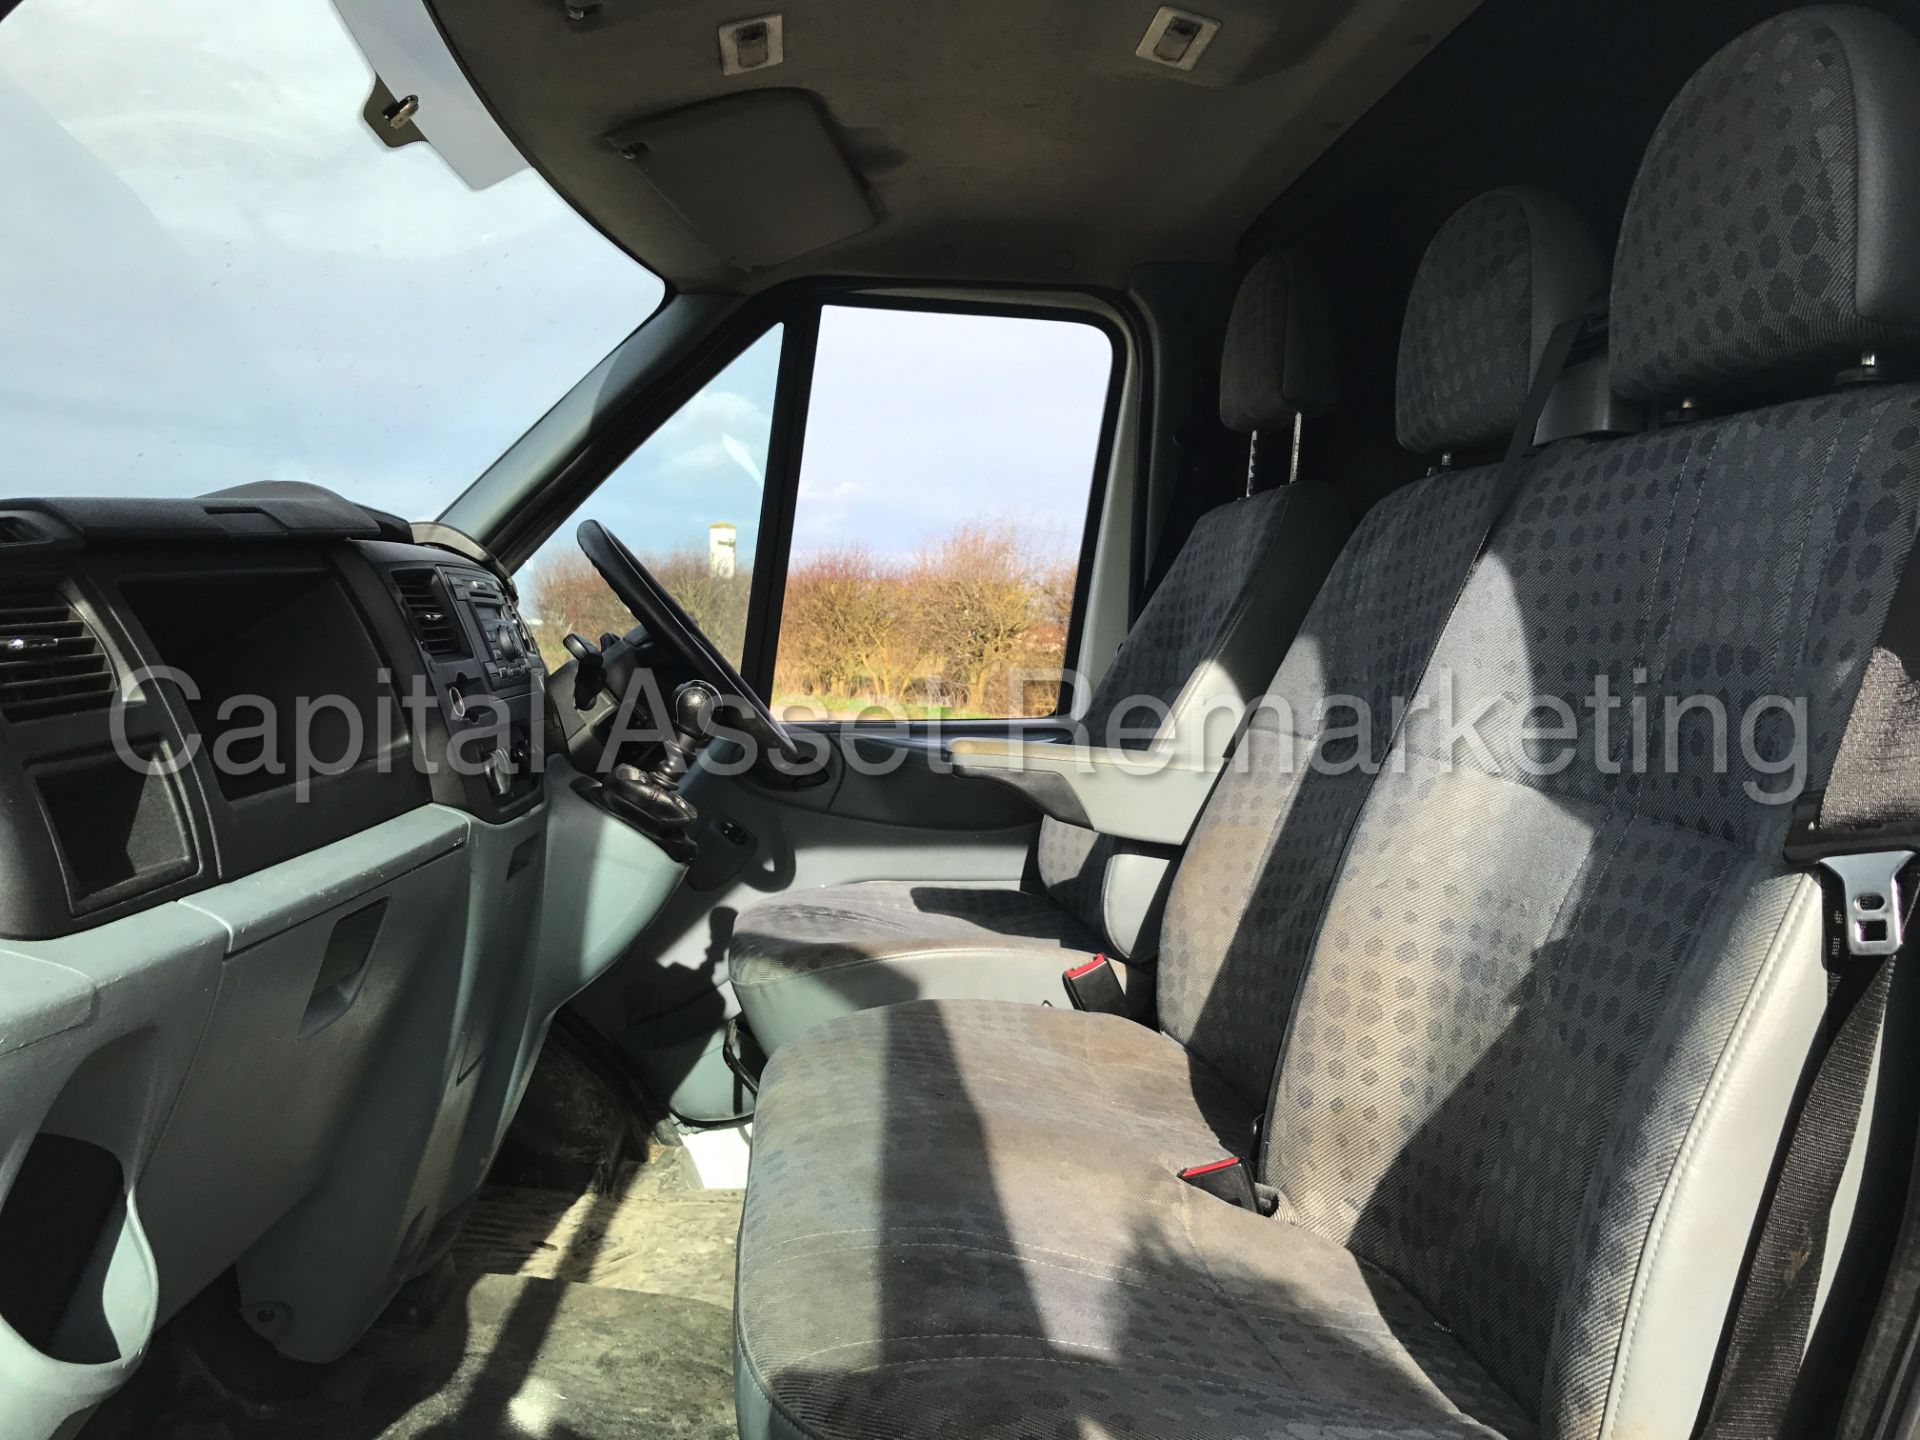 (On Sale) FORD TRANSIT 100 T280 FWD (2012) '2.2 TDCI - SWB - 100 PS - 6 SPEED' (1 FORMER KEEPER) - Image 14 of 19